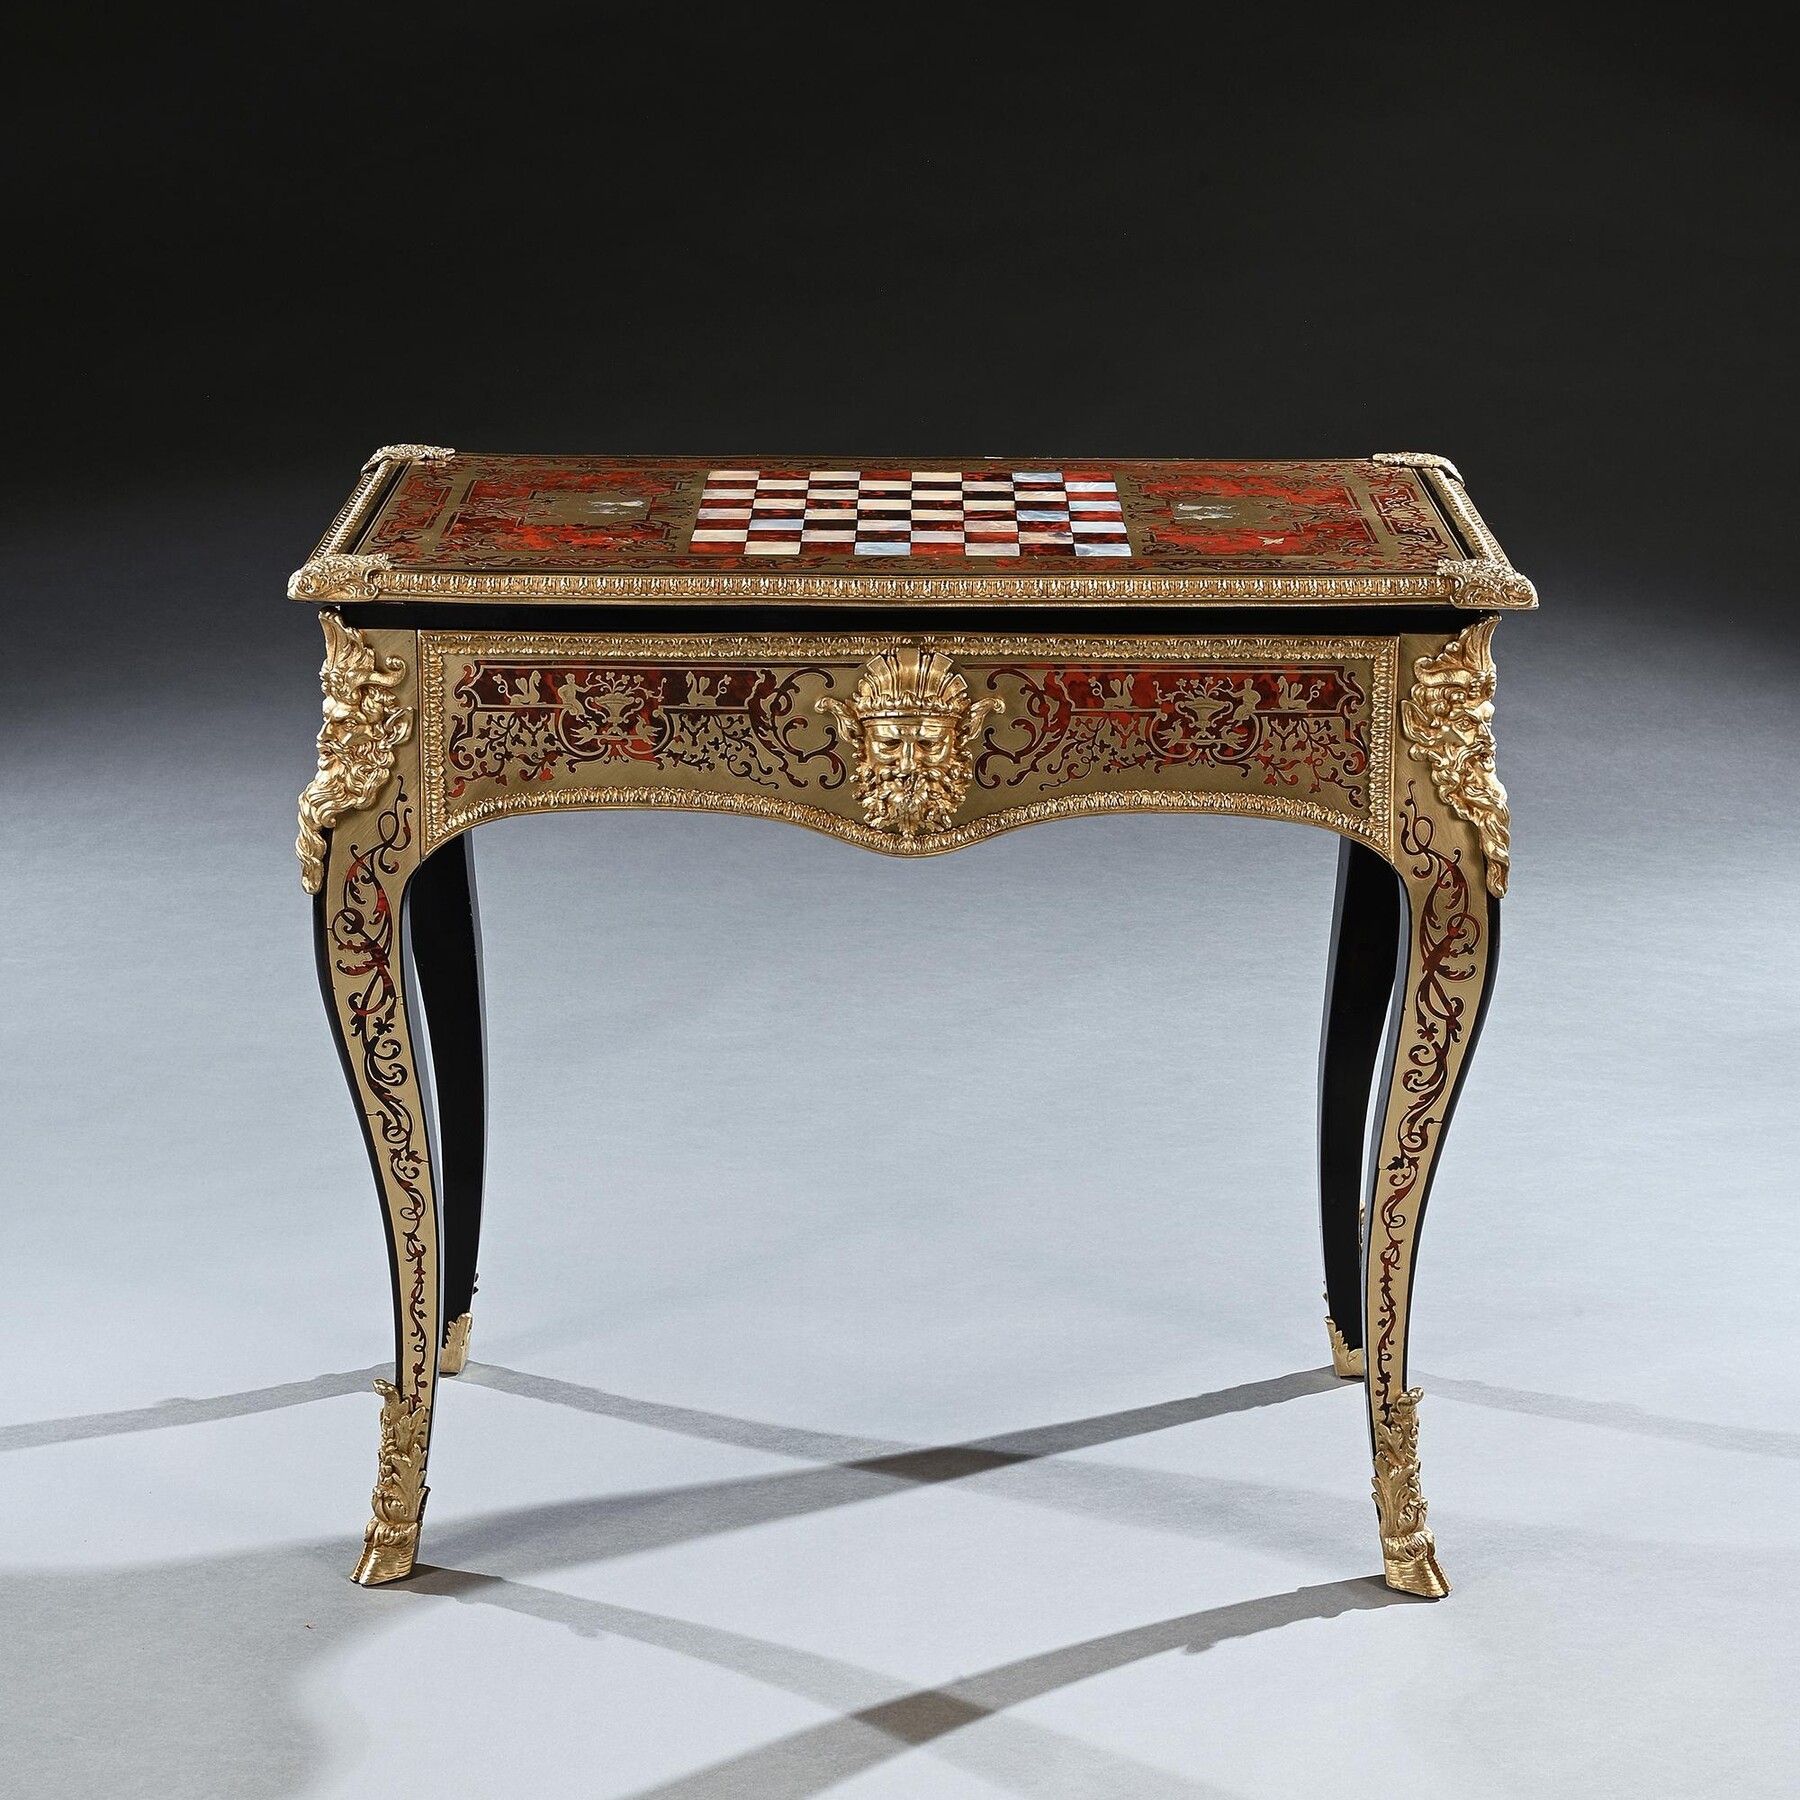 Exceptional Boulle and Ormolu Mounted Games Table in the French Louis XVI style attributed to Thomas Parker (active 1805-1830)